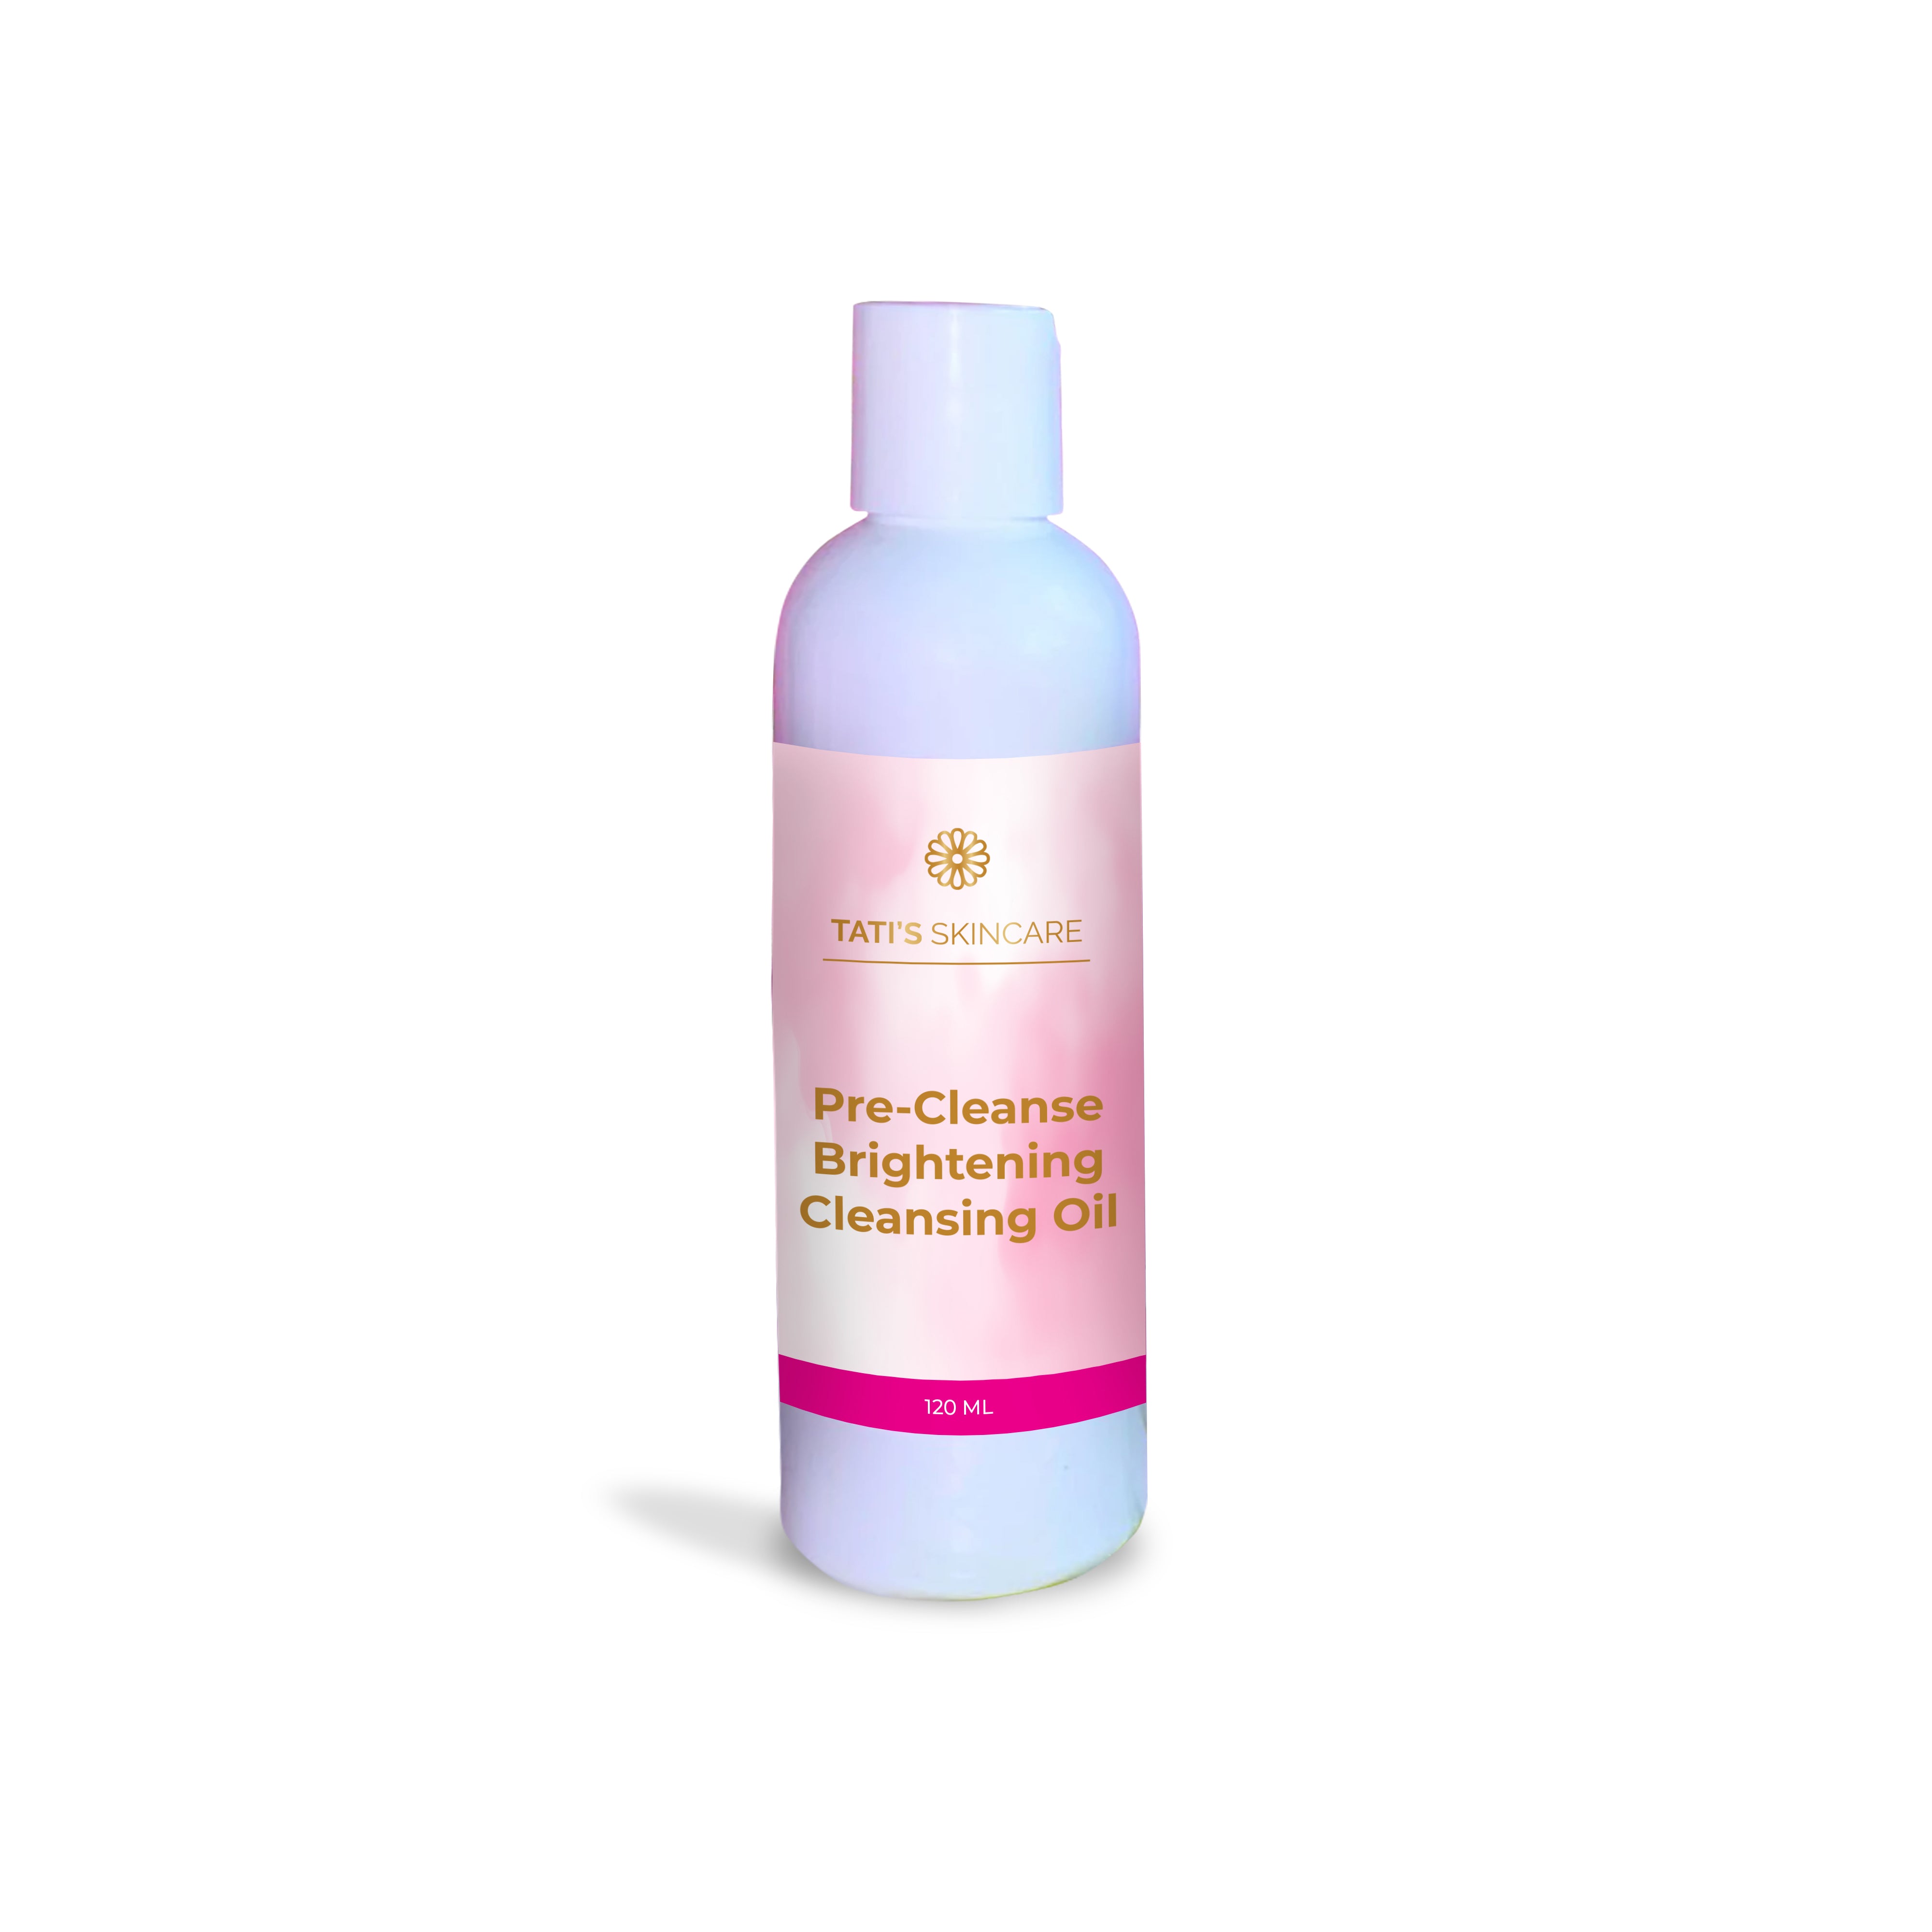 Pre-Cleanse Brightening Cleansing Oil